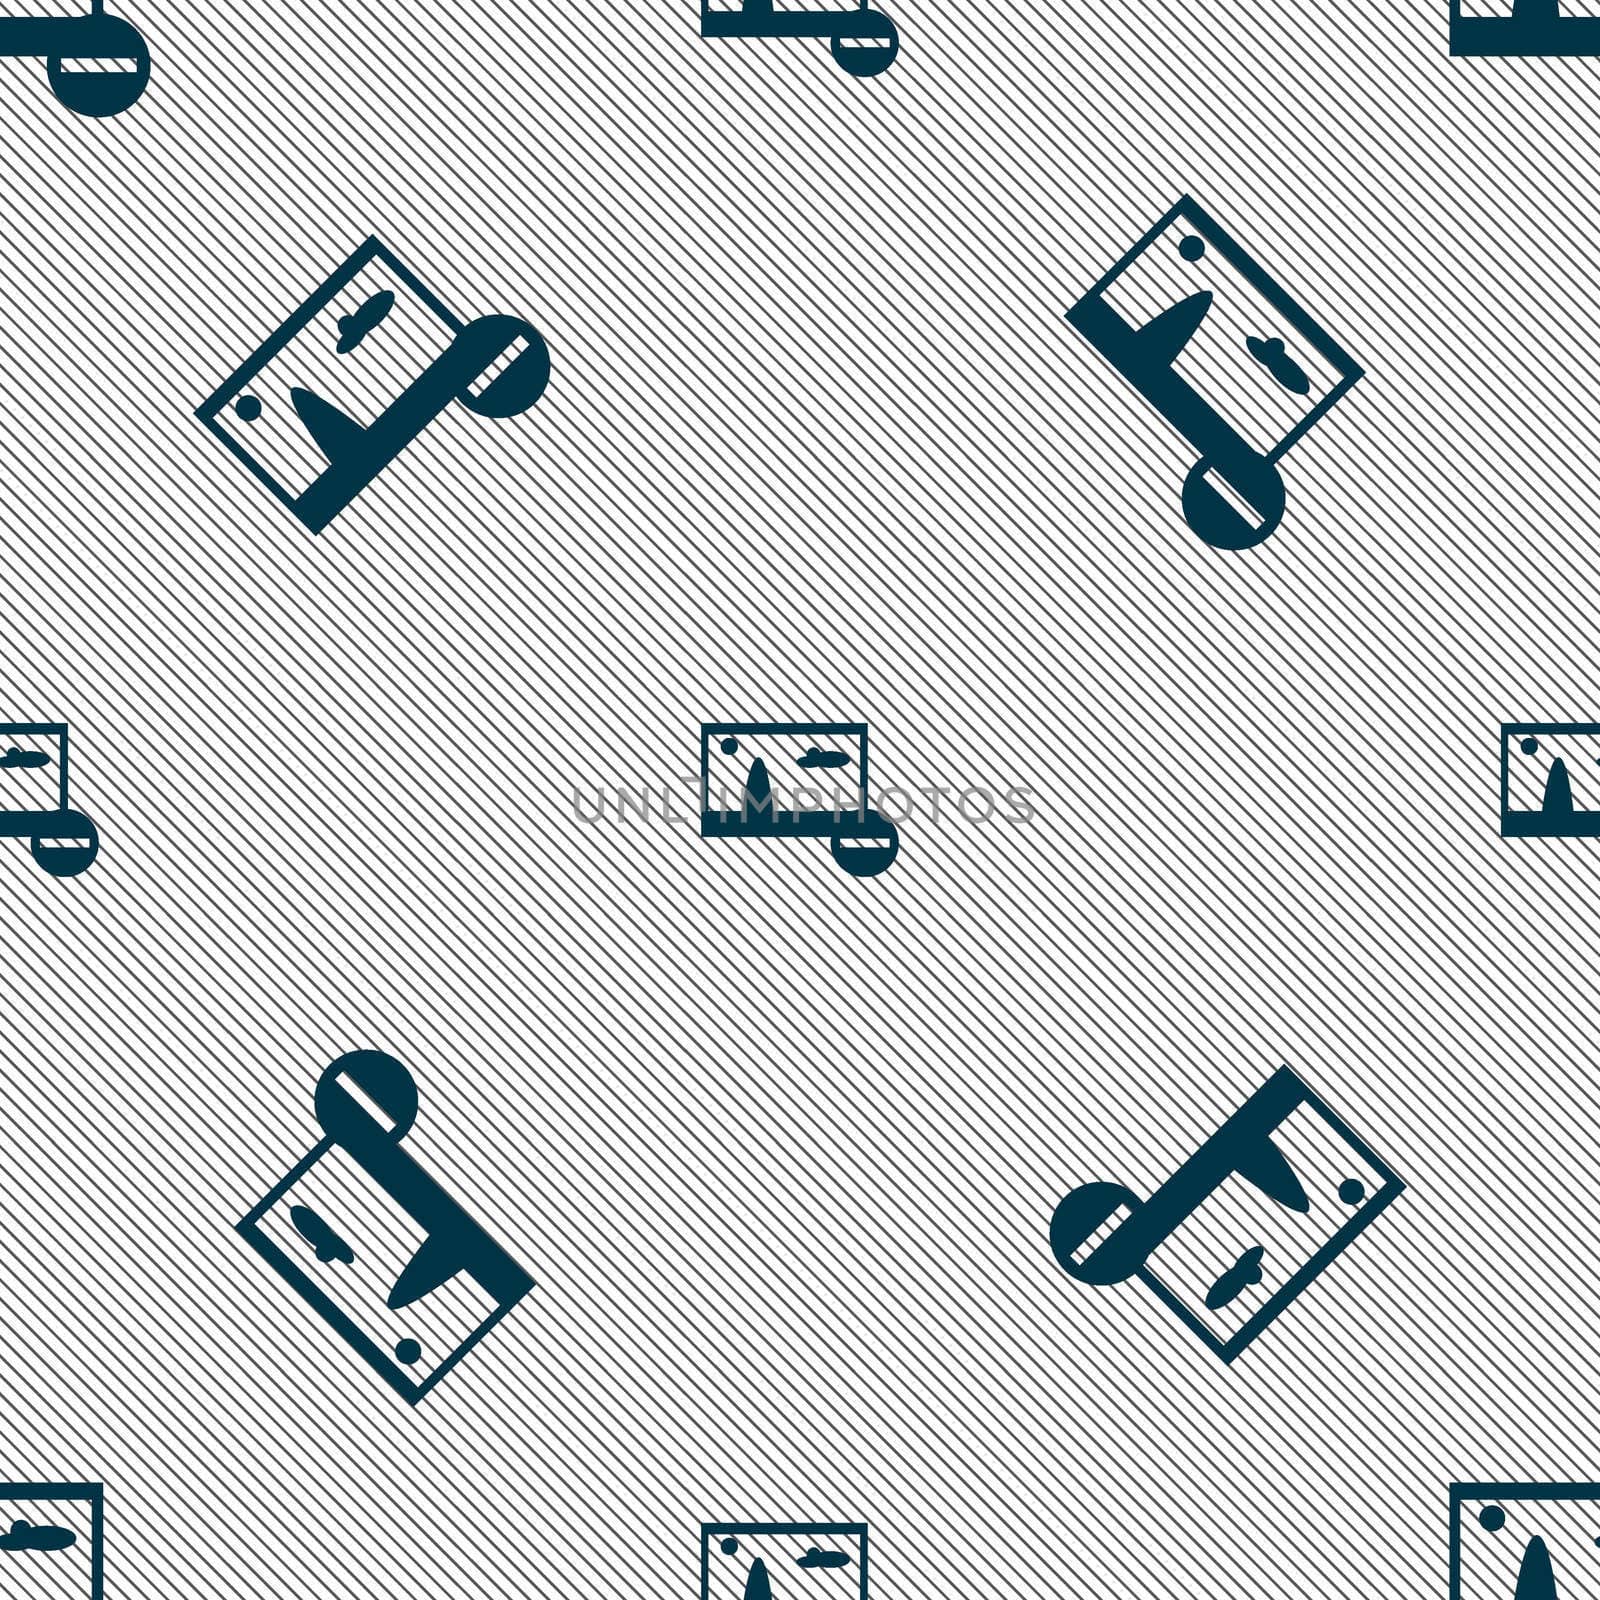 Minus File JPG sign icon. Download image file symbol. Set colourful buttons. Seamless pattern with geometric texture. illustration